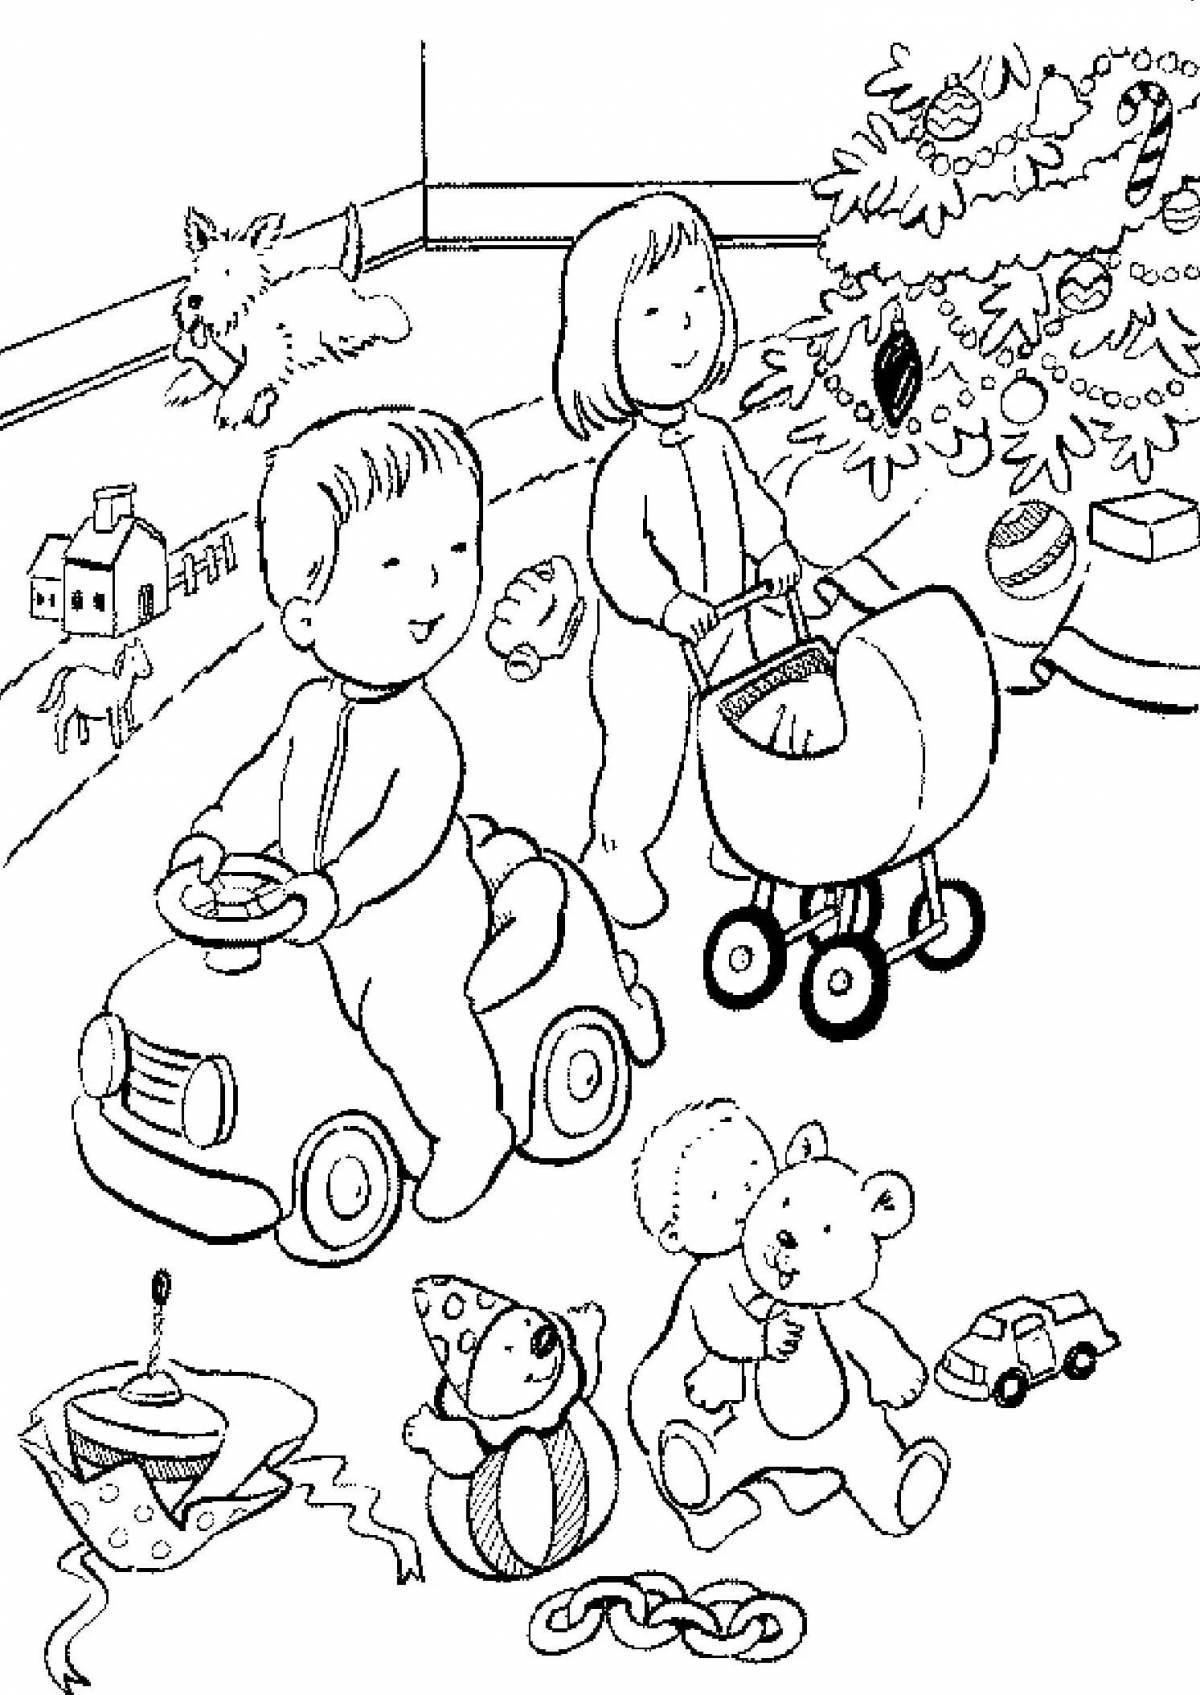 Joyful children playing coloring pages